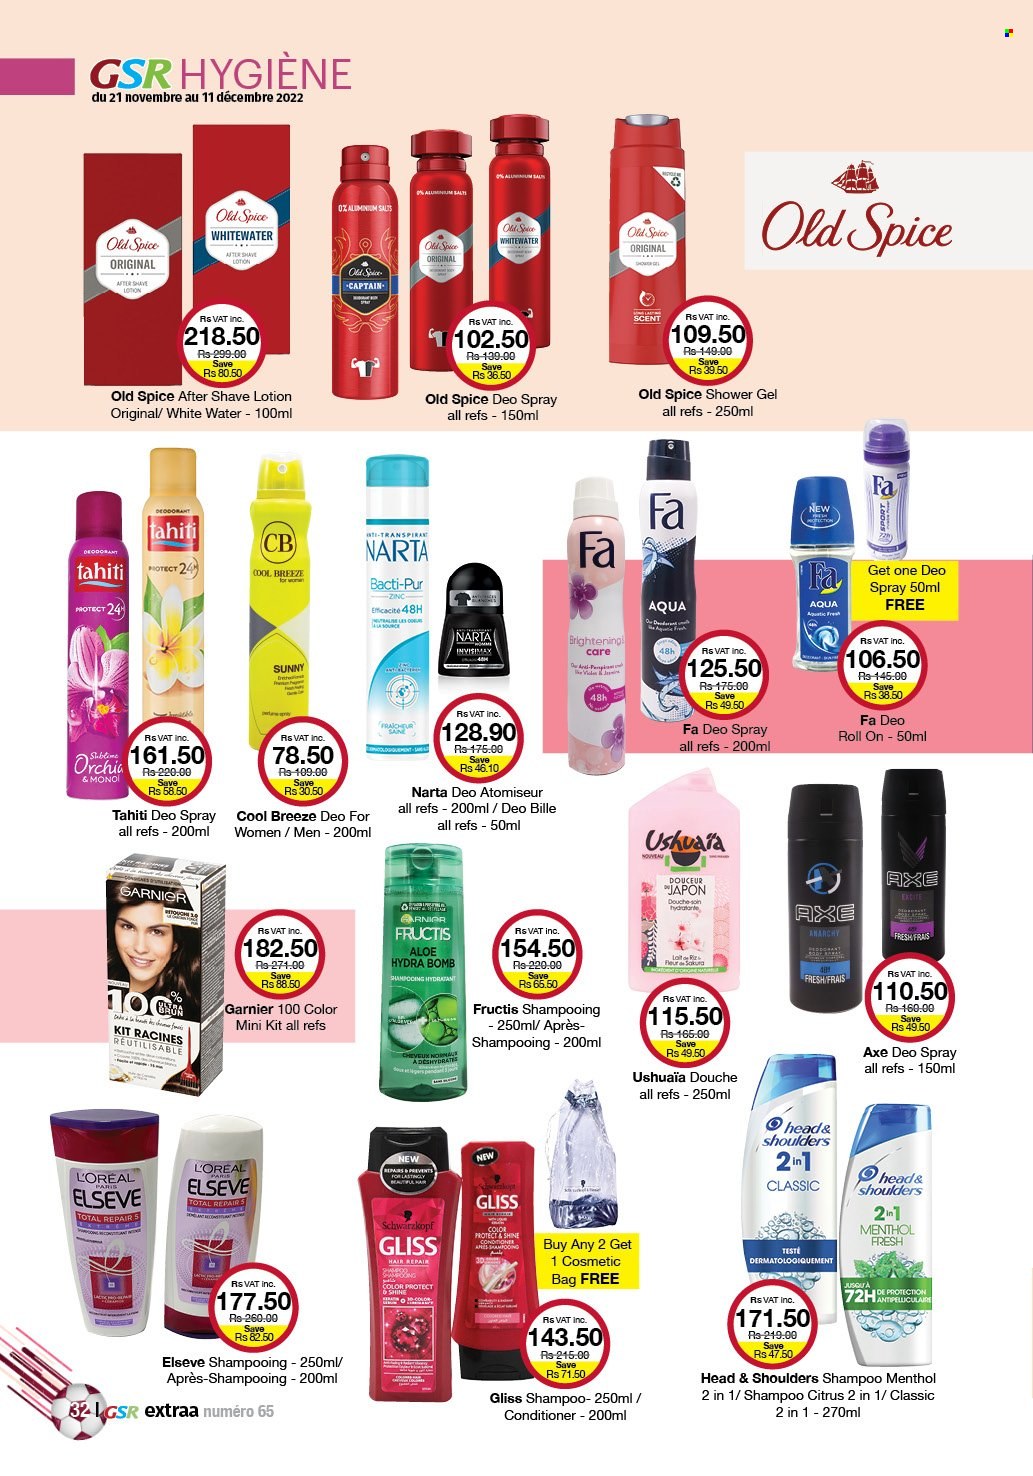 thumbnail - GSR Catalogue - 21.11.2022 - 11.12.2022 - Sales products - salt, spice, shower gel, Gliss, L’Oréal, conditioner, Fructis, body lotion, after shave, anti-perspirant, roll-on, Axe, cosmetic bag, Garnier, shampoo, Head & Shoulders, Old Spice, Schwarzkopf, deodorant. Page 32.